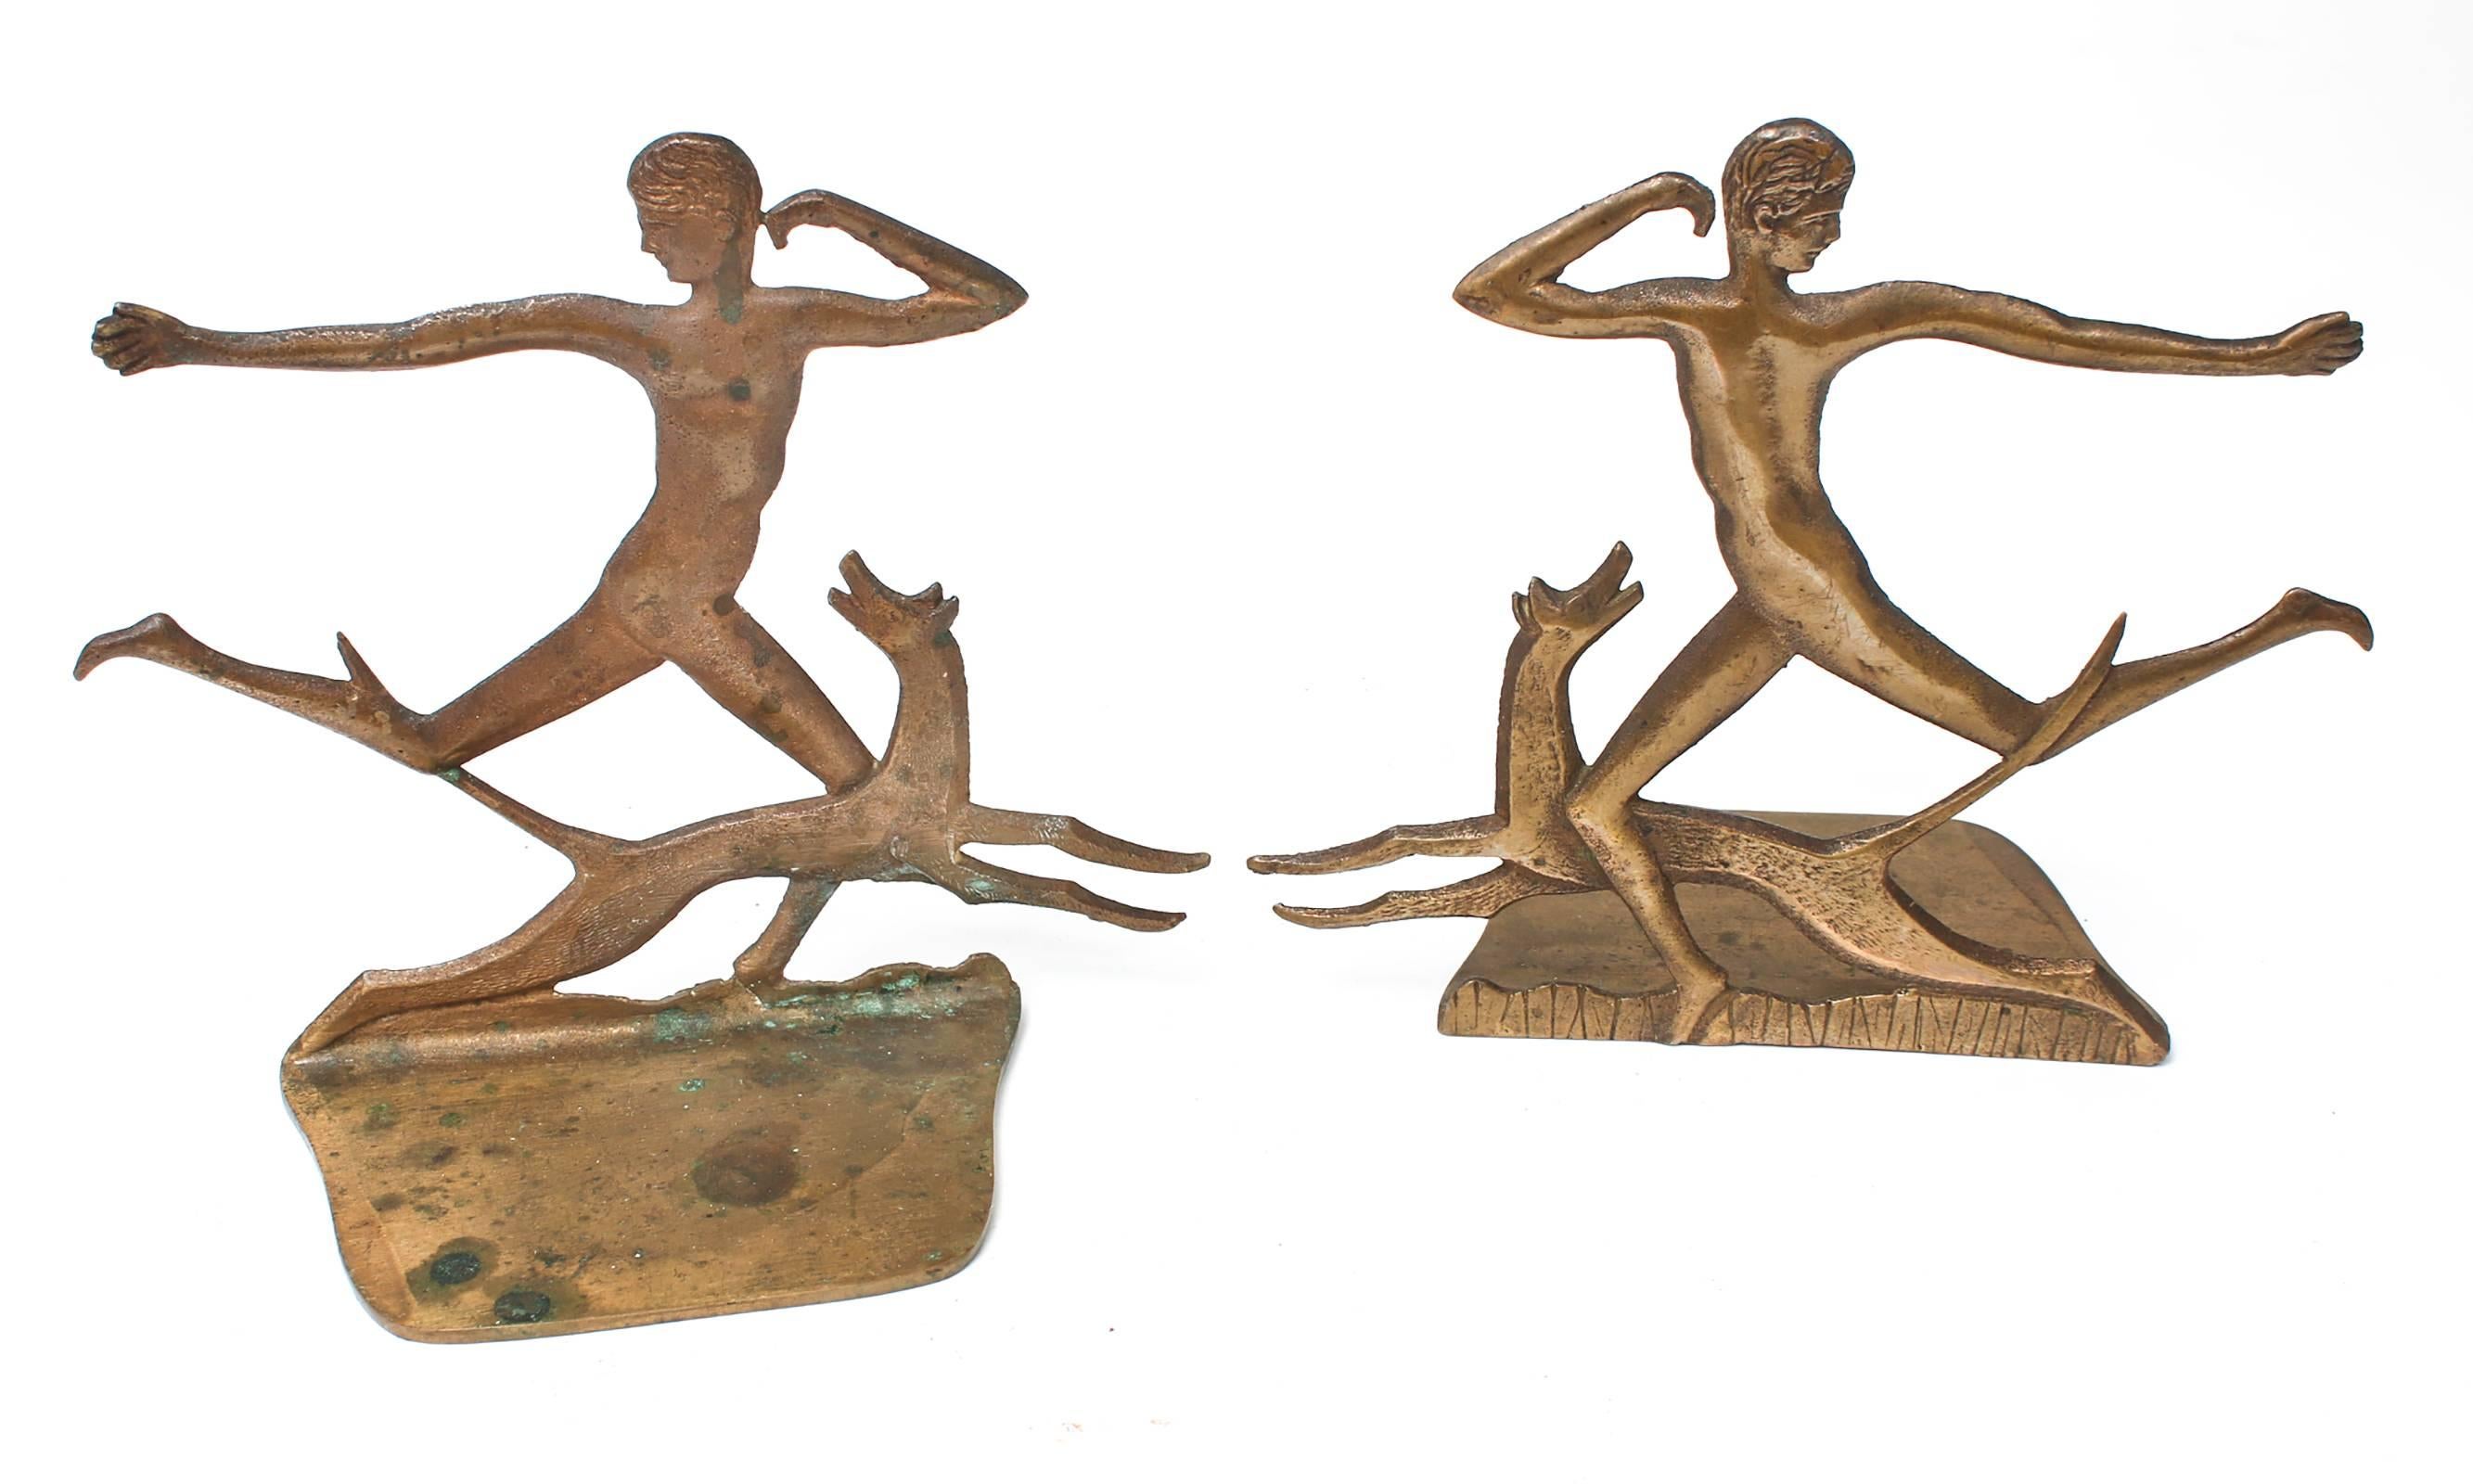 Charming pair of bronze male figures in midst of running with a dog.
Art Deco style from 1900s. Very decorative with details on both sides.